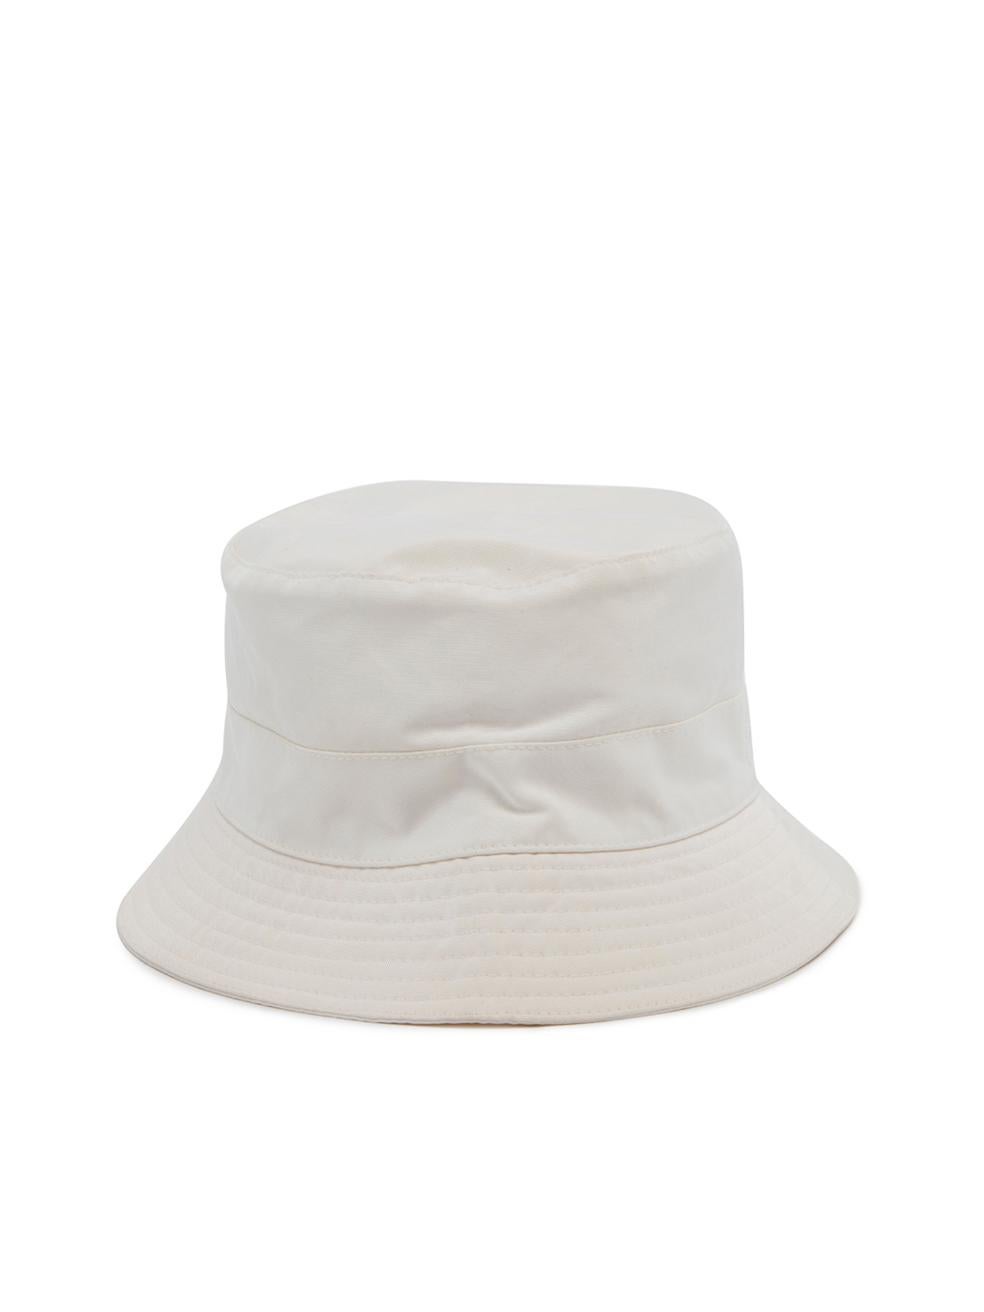 CONDITION is Very good. Hardly any visible wear to hat is evident. Minor stain on the right side seam is seen on this used Hermes designer resale item. Details White Polyester Bucket hat H letter embroidered Hermes logo patterned lining Composition